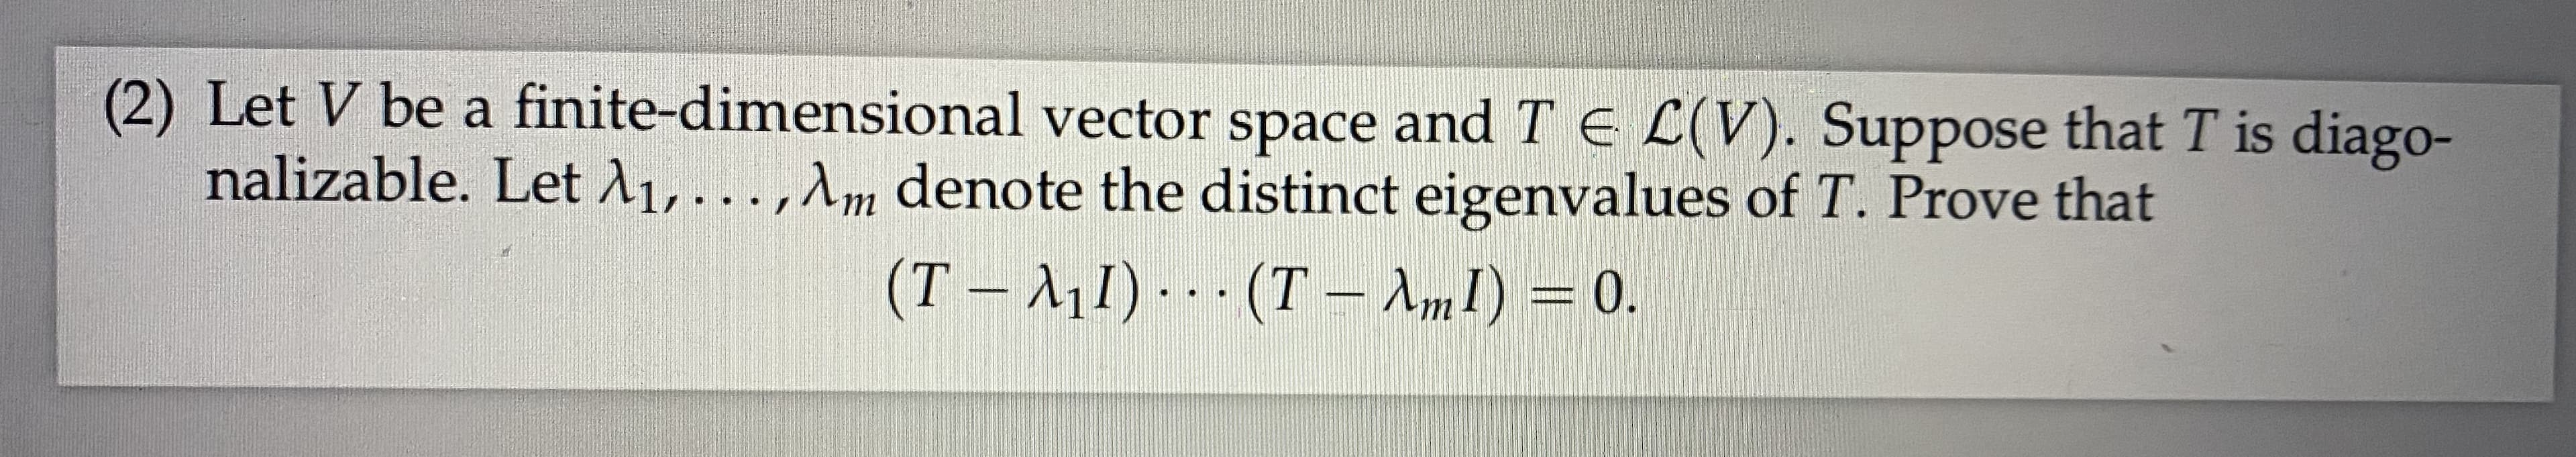 (2) Let V be a finite-dimensional vector space and T E L(V). Suppose that T is diago-
nalizable. Let A1,...,Am denote the distinct eigenvalues of T. Prove that
(T – A11) - - - (T – AmI) = 0.
%3D
